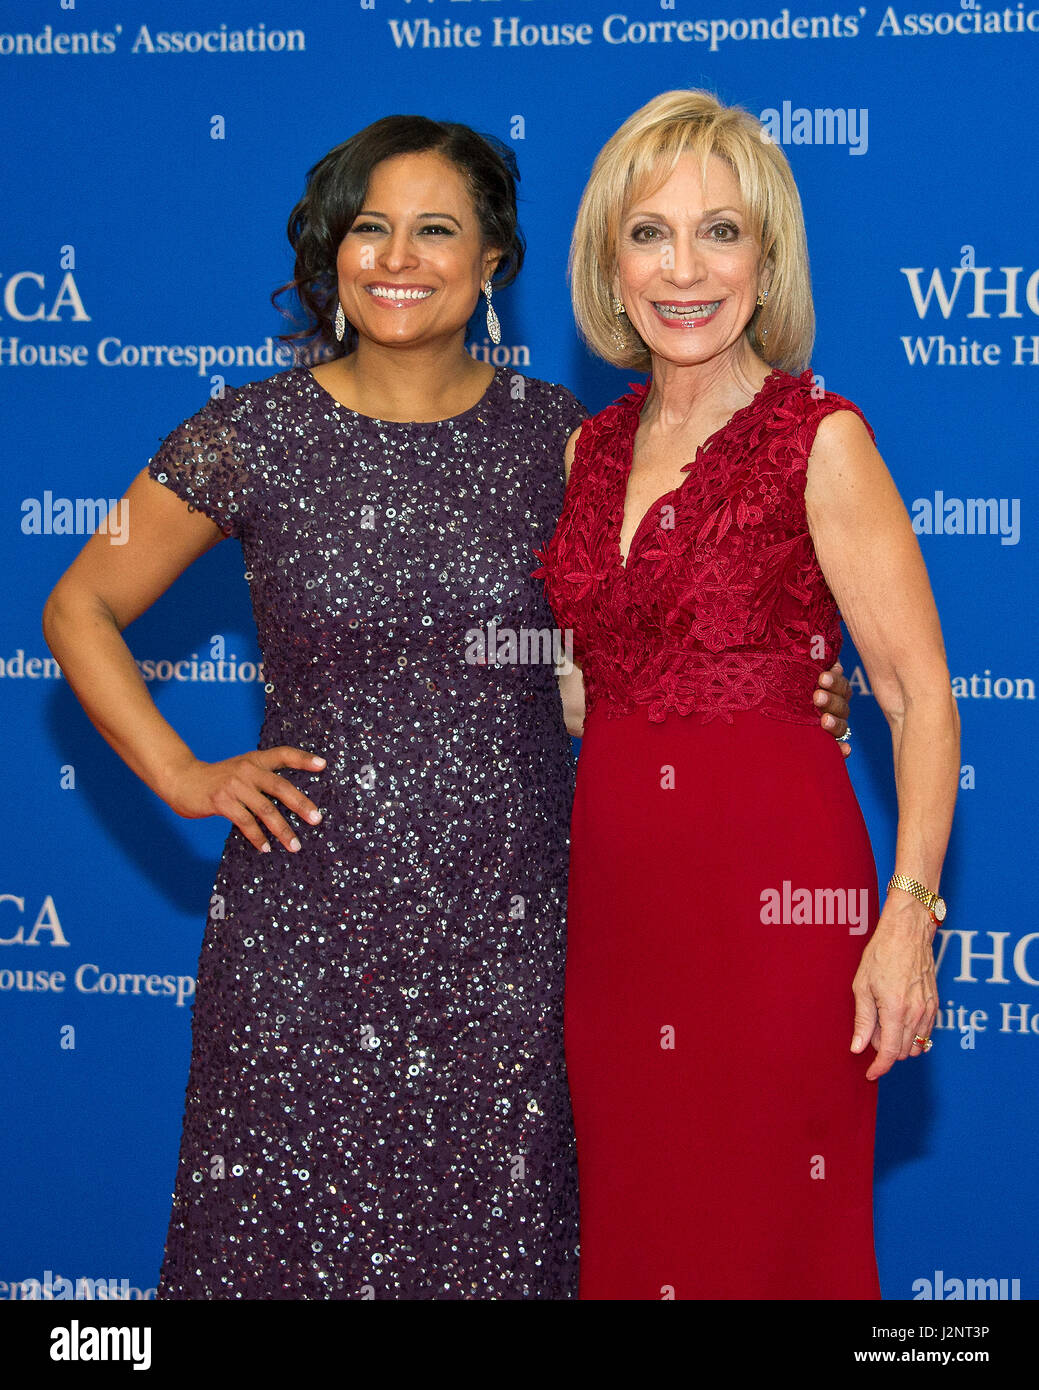 NBC News White House Correspondent Kristen Welker, left, and Andrea Mitchell arrive for the 2017 White House Correspondents Association Annual Dinner at the Washington Hilton Hotel on Saturday, April 29, 2017. Credit: Ron Sachs/CNP /MediaPunch Stock Photo